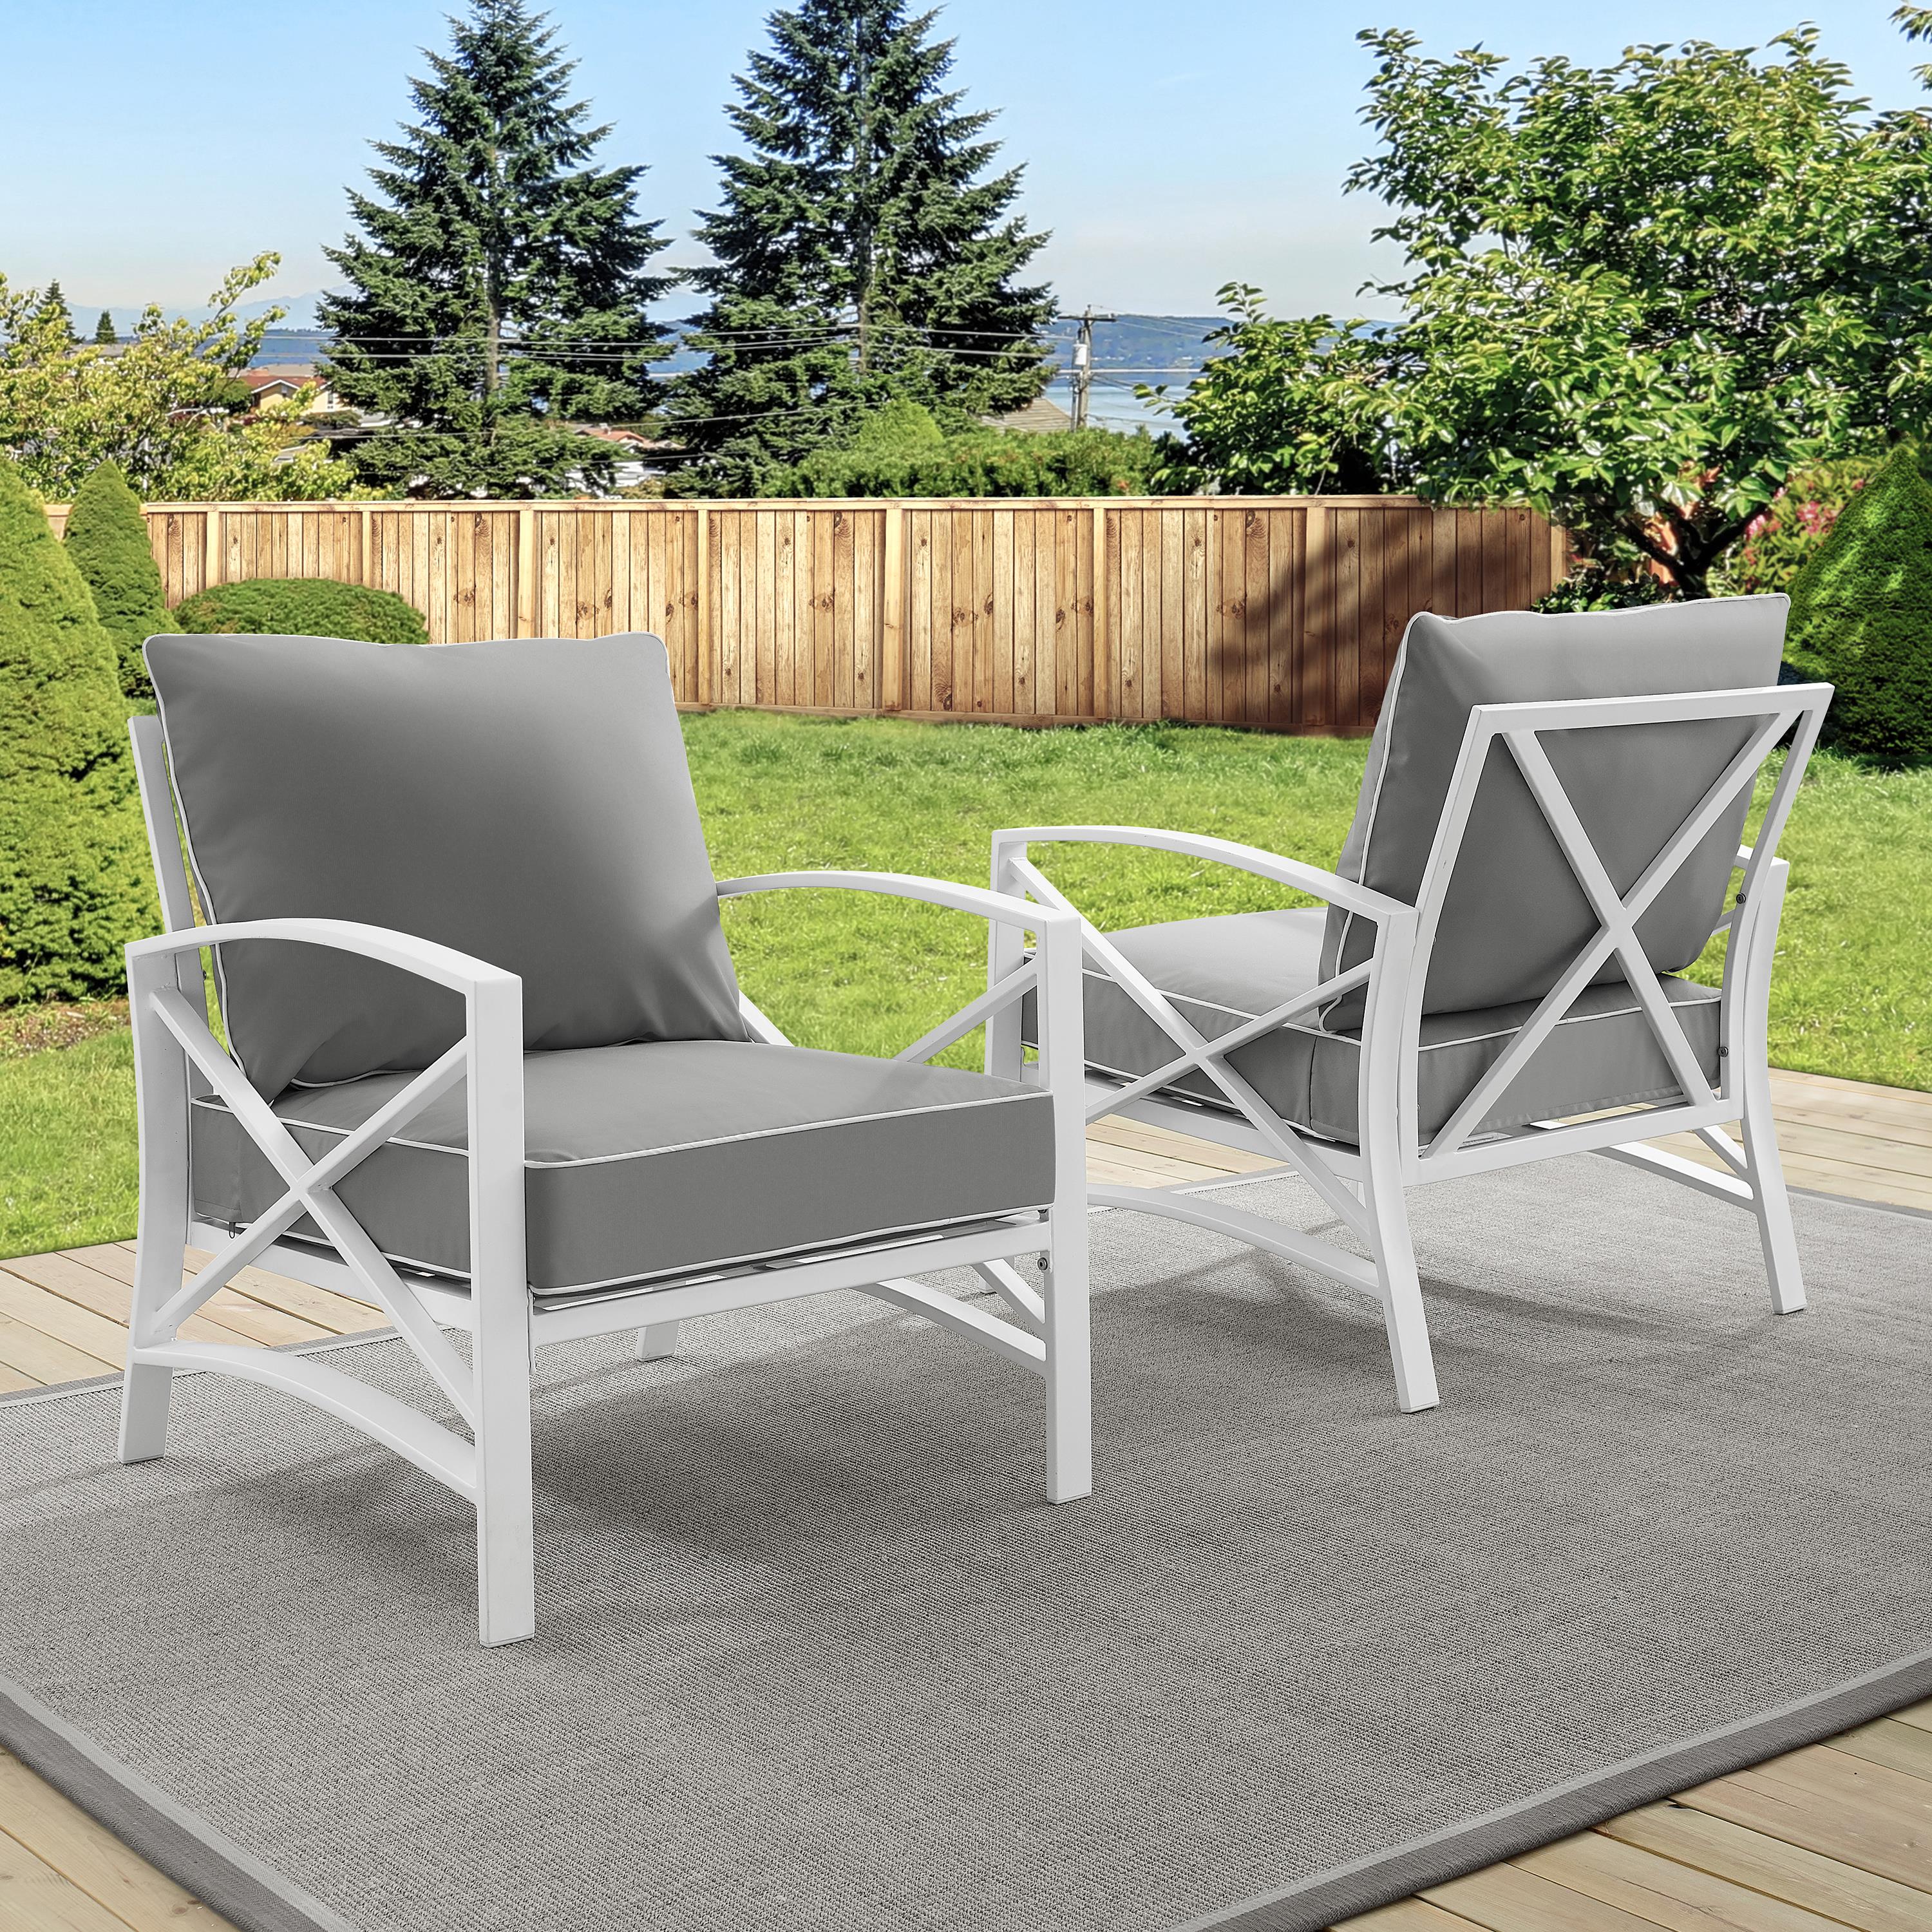 Crosley Kaplan Patio Arm Chair in Gray and White (Set of 2) - image 4 of 7